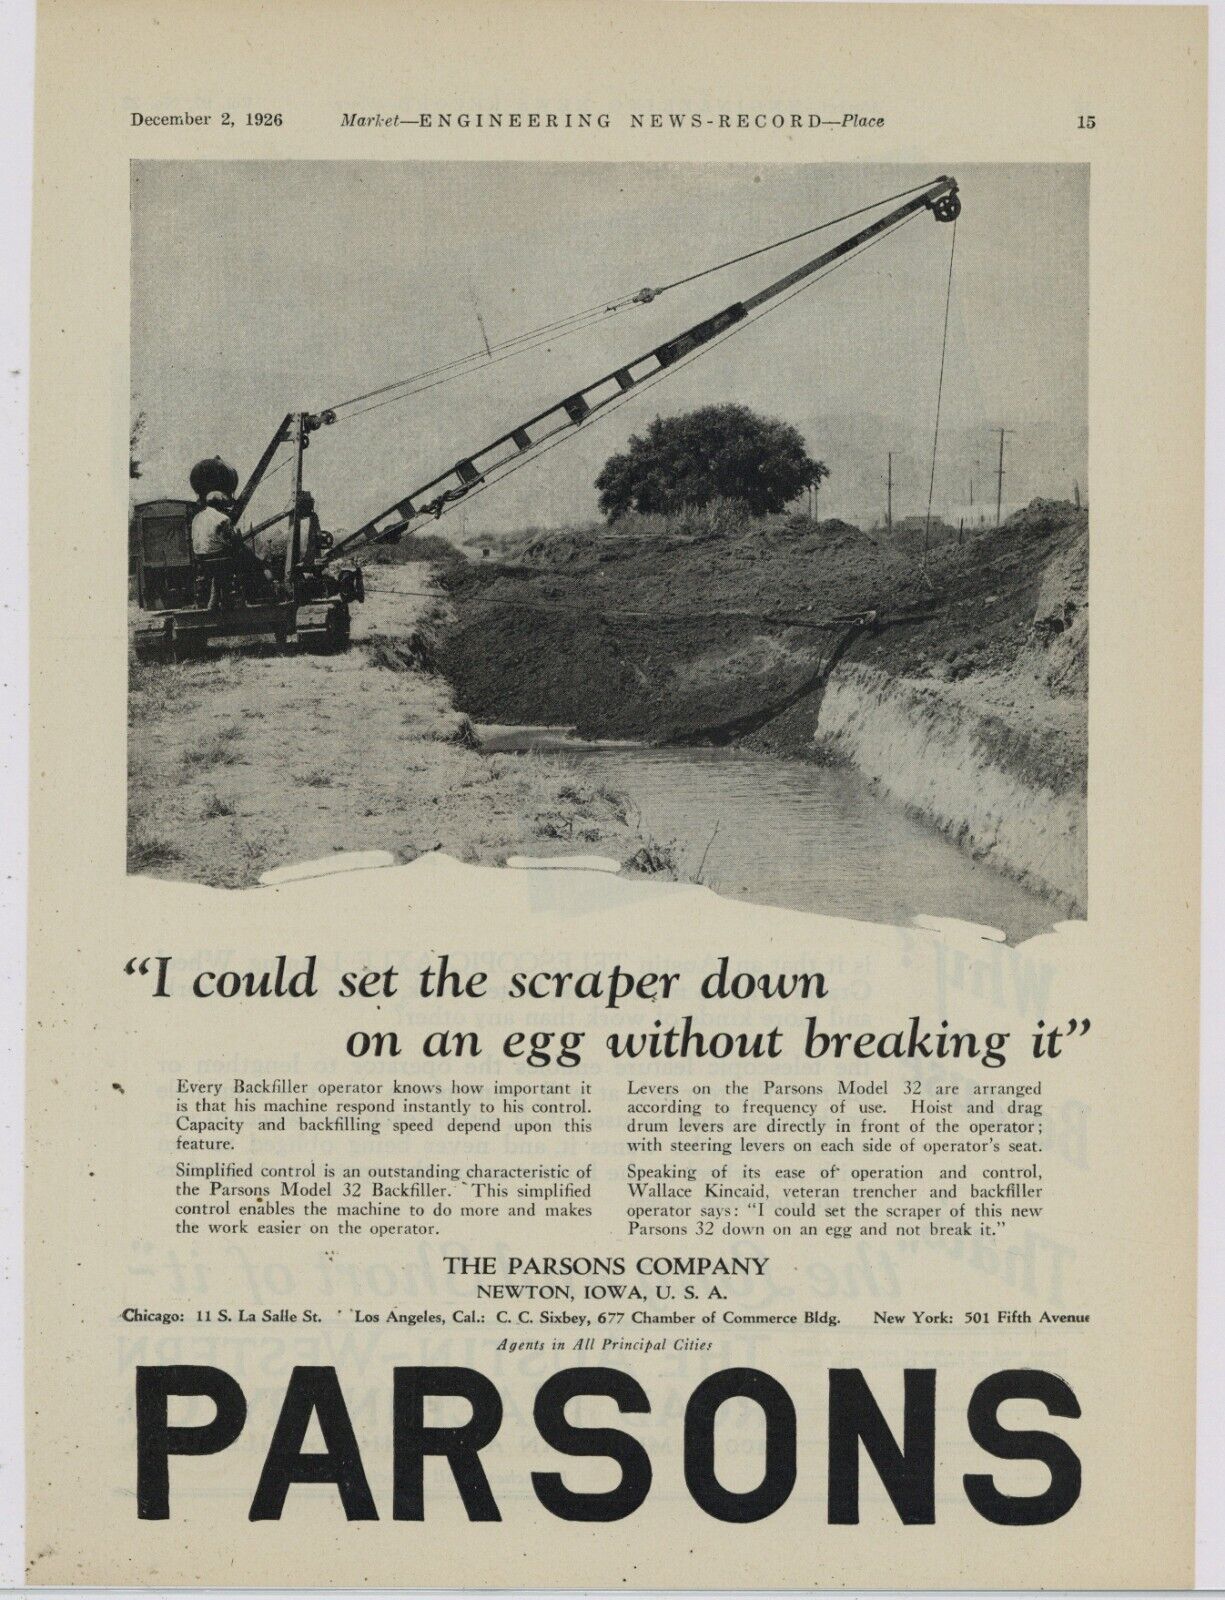 1926 Parsons Co. Ad: Model 32 Backfiller Pictured - Set the Scraper on an Egg